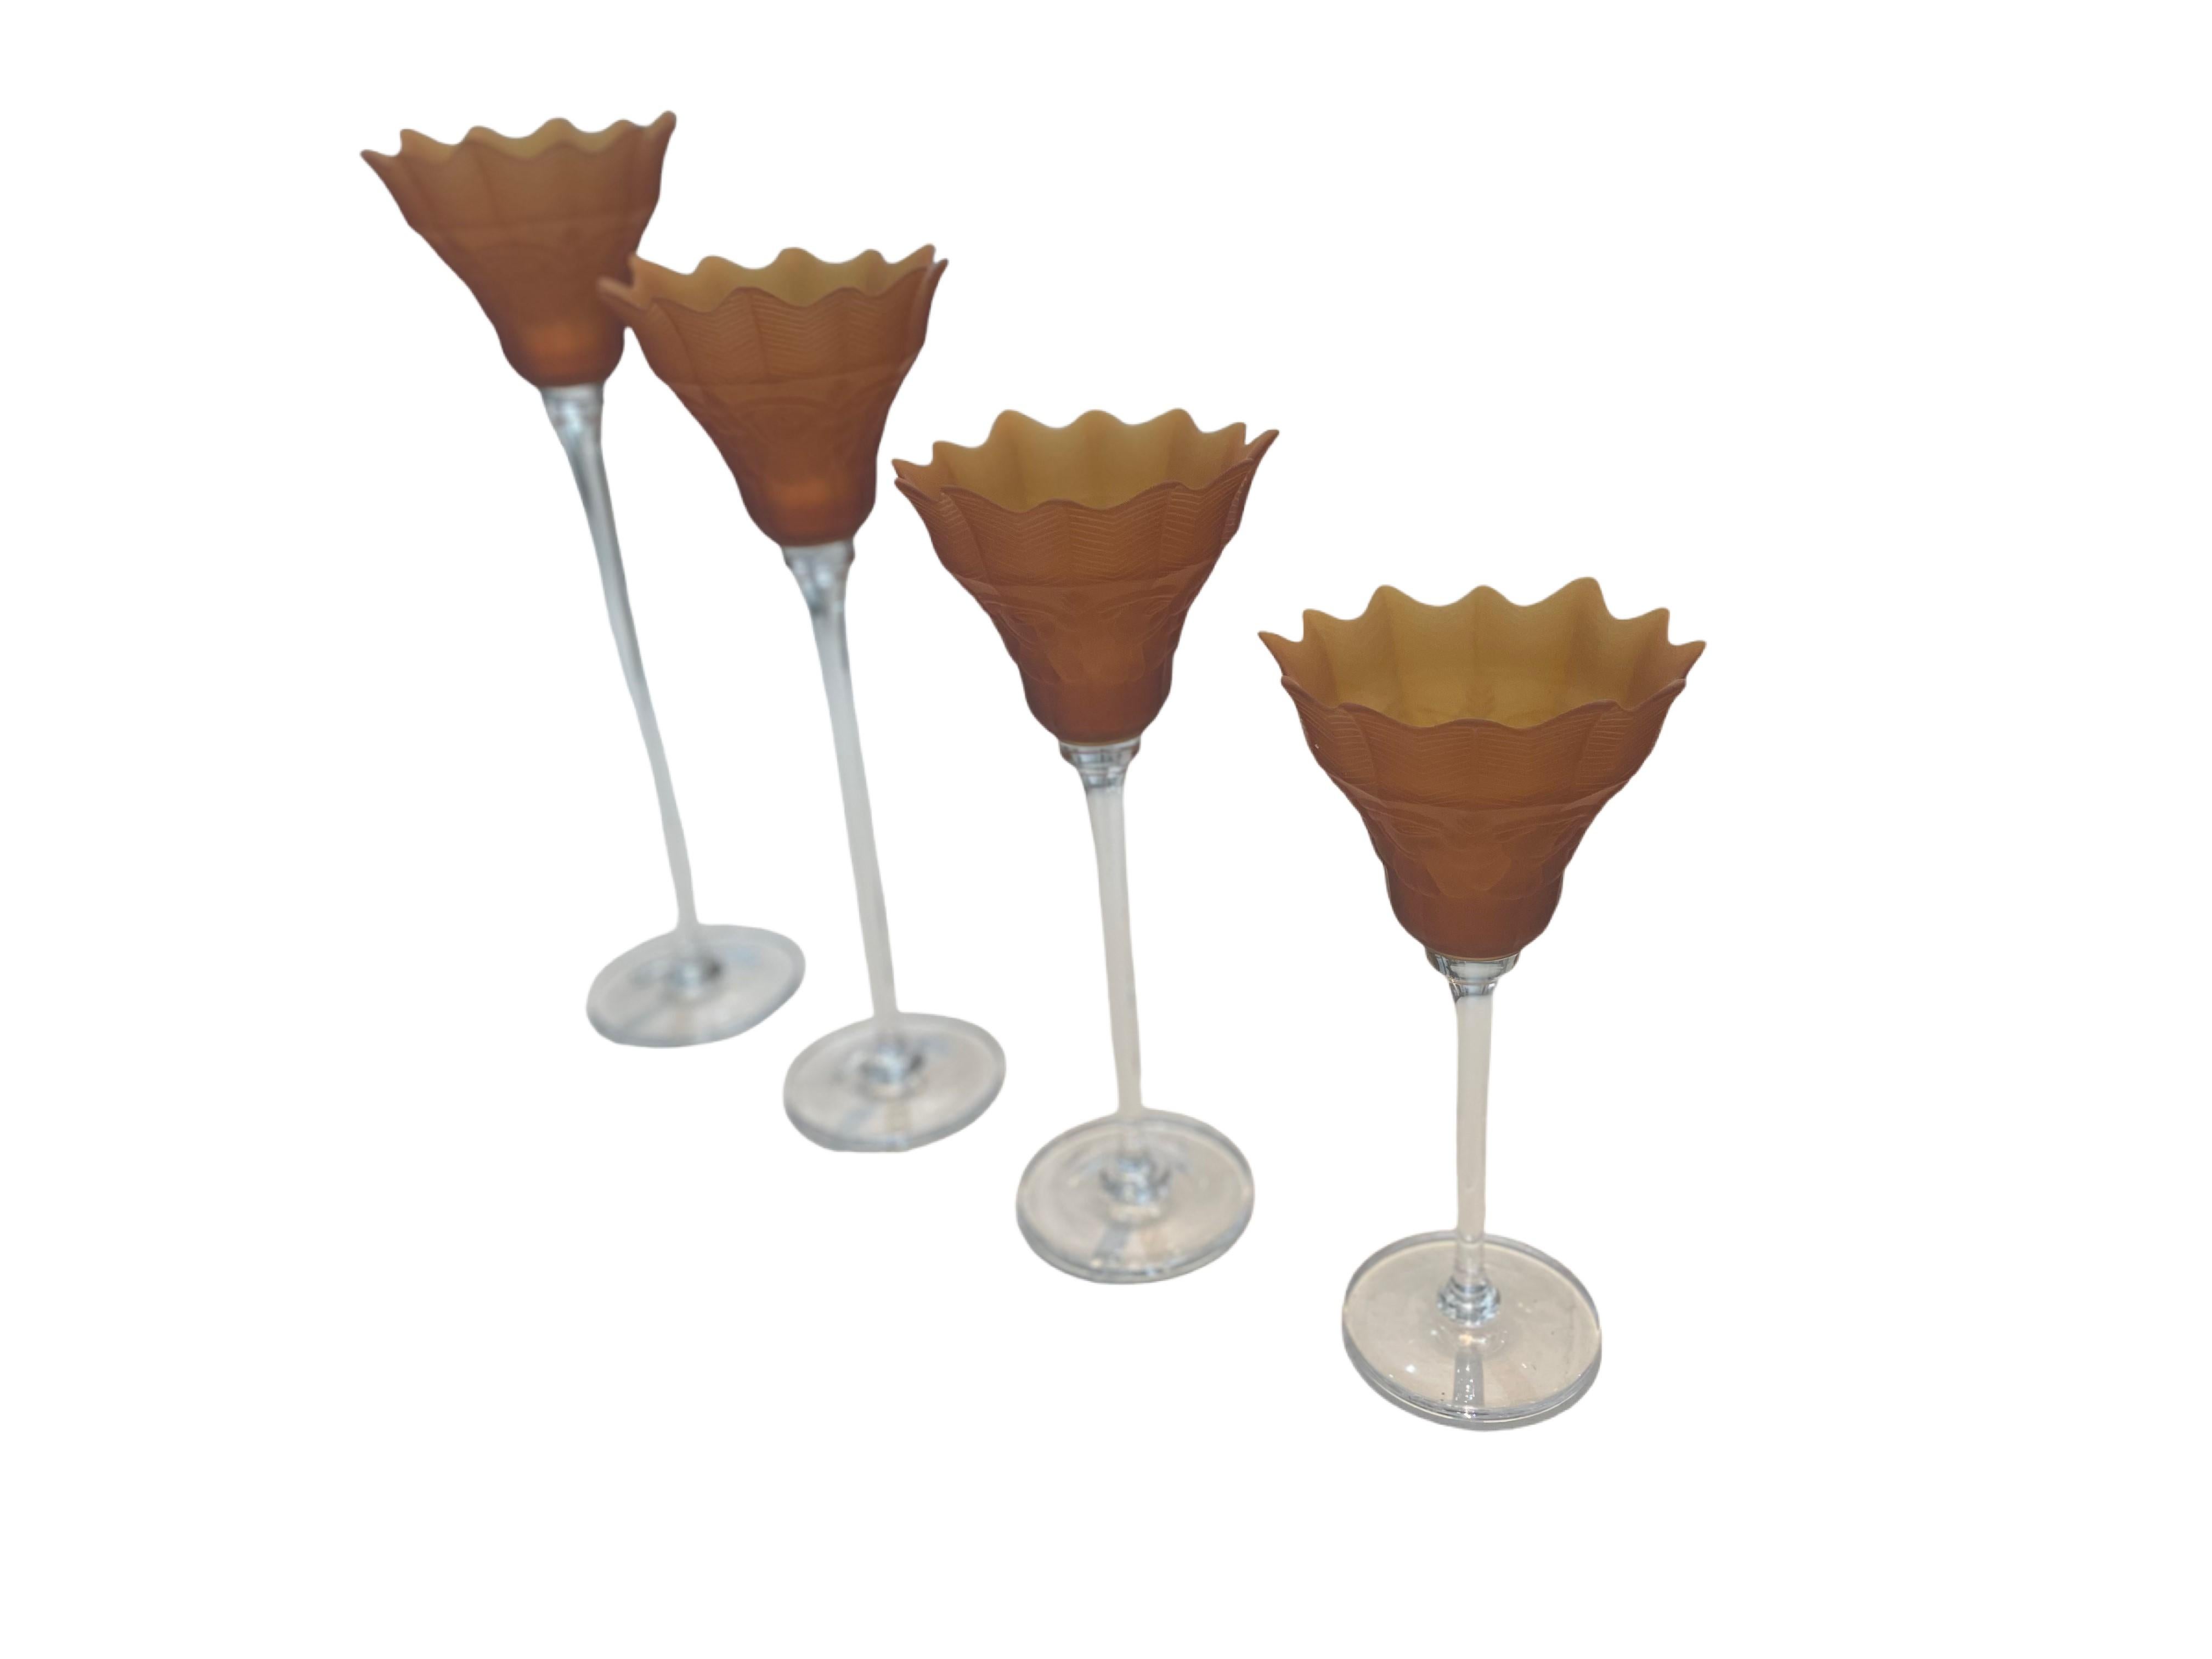 The frosted amber-colored floriform top of these vintage candleholders contrast beautifully with the set’s clear glass stem and base. All measure 6.25 inches in diameter (top and base), while they vary in height: 19.5”; 17.25”; 15”; 13” - adding